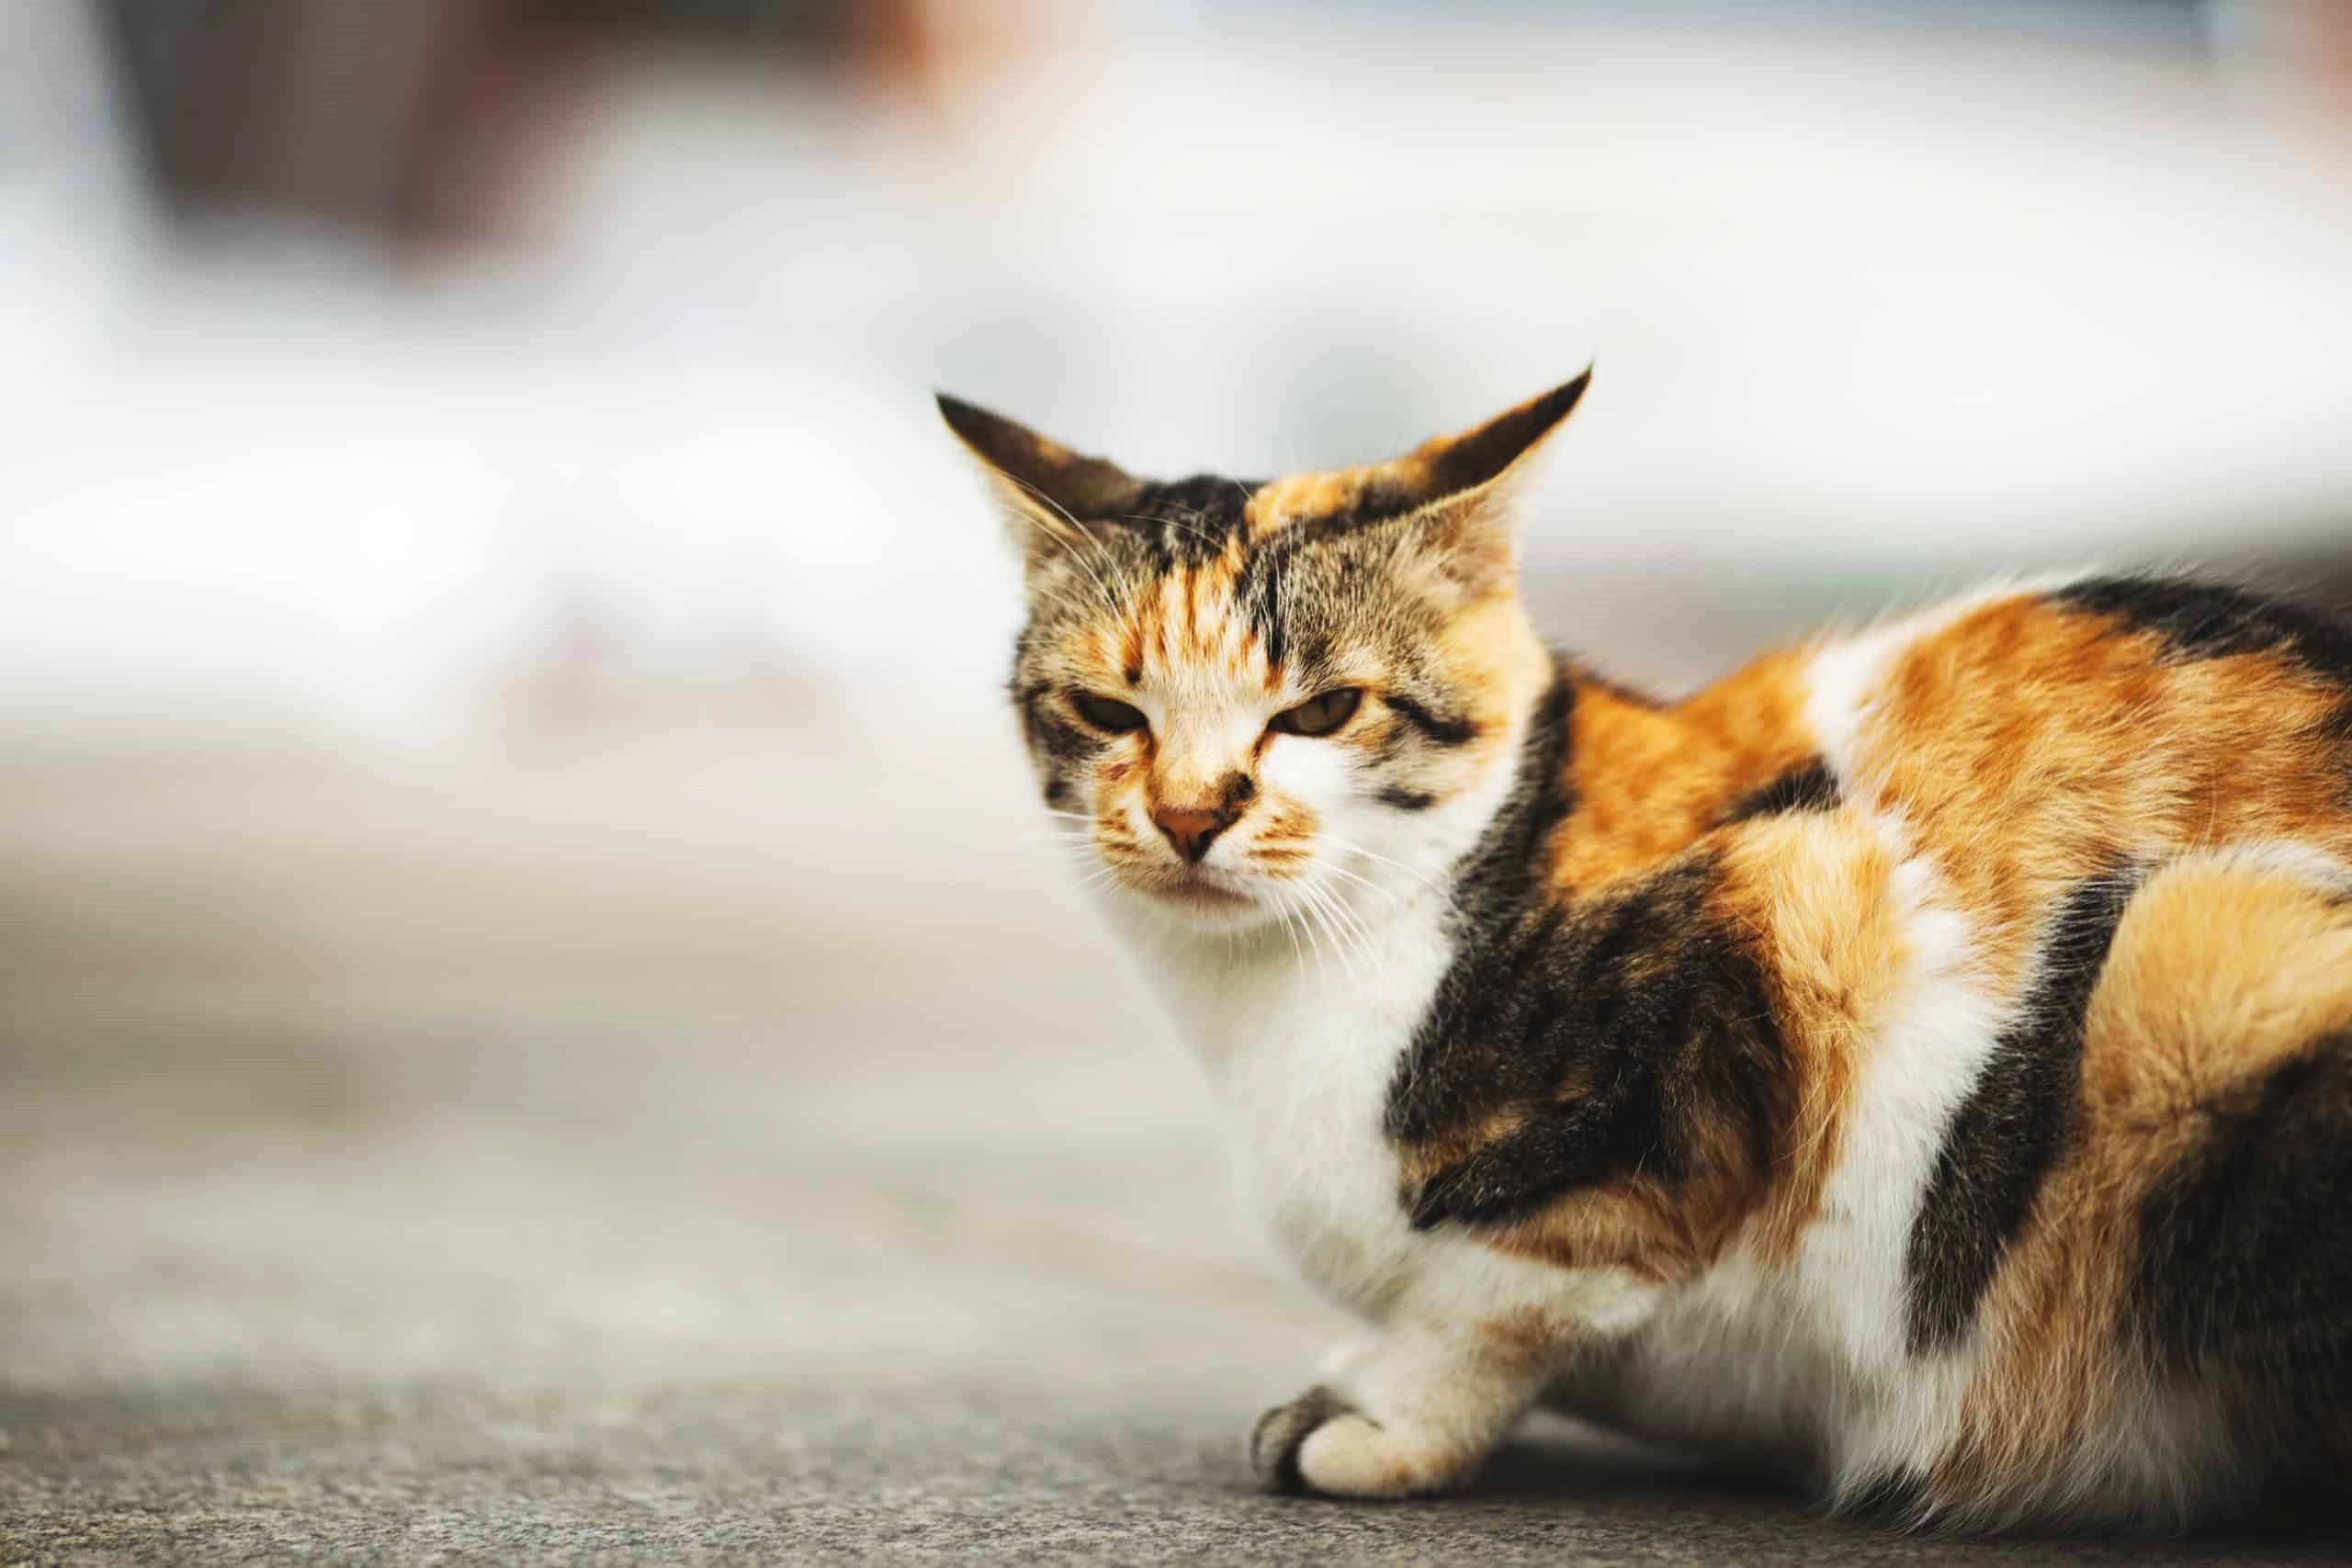 The Surprising Meaning Behind A Cat’s “Airplane Ears”